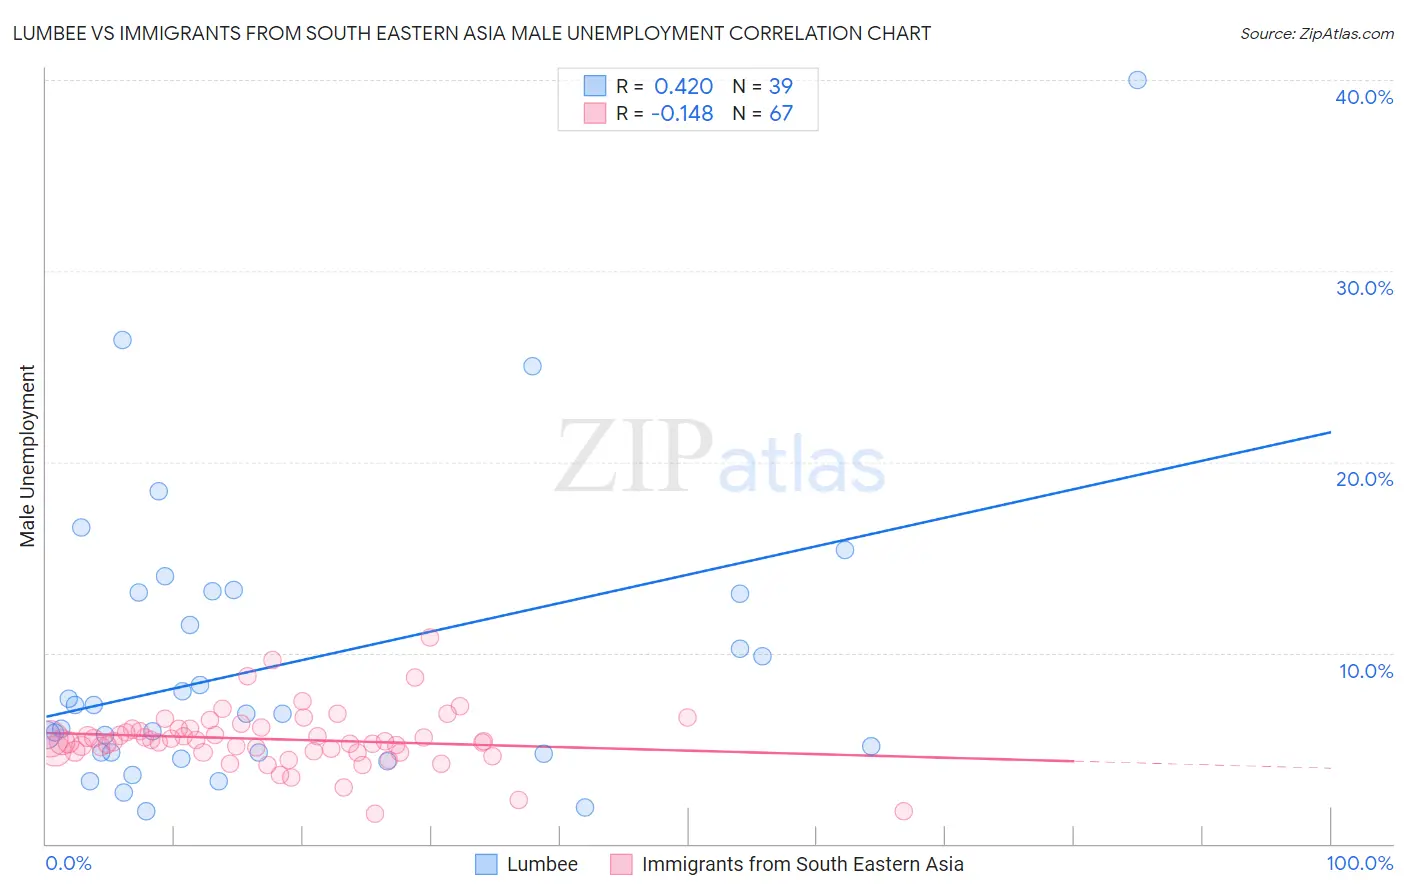 Lumbee vs Immigrants from South Eastern Asia Male Unemployment